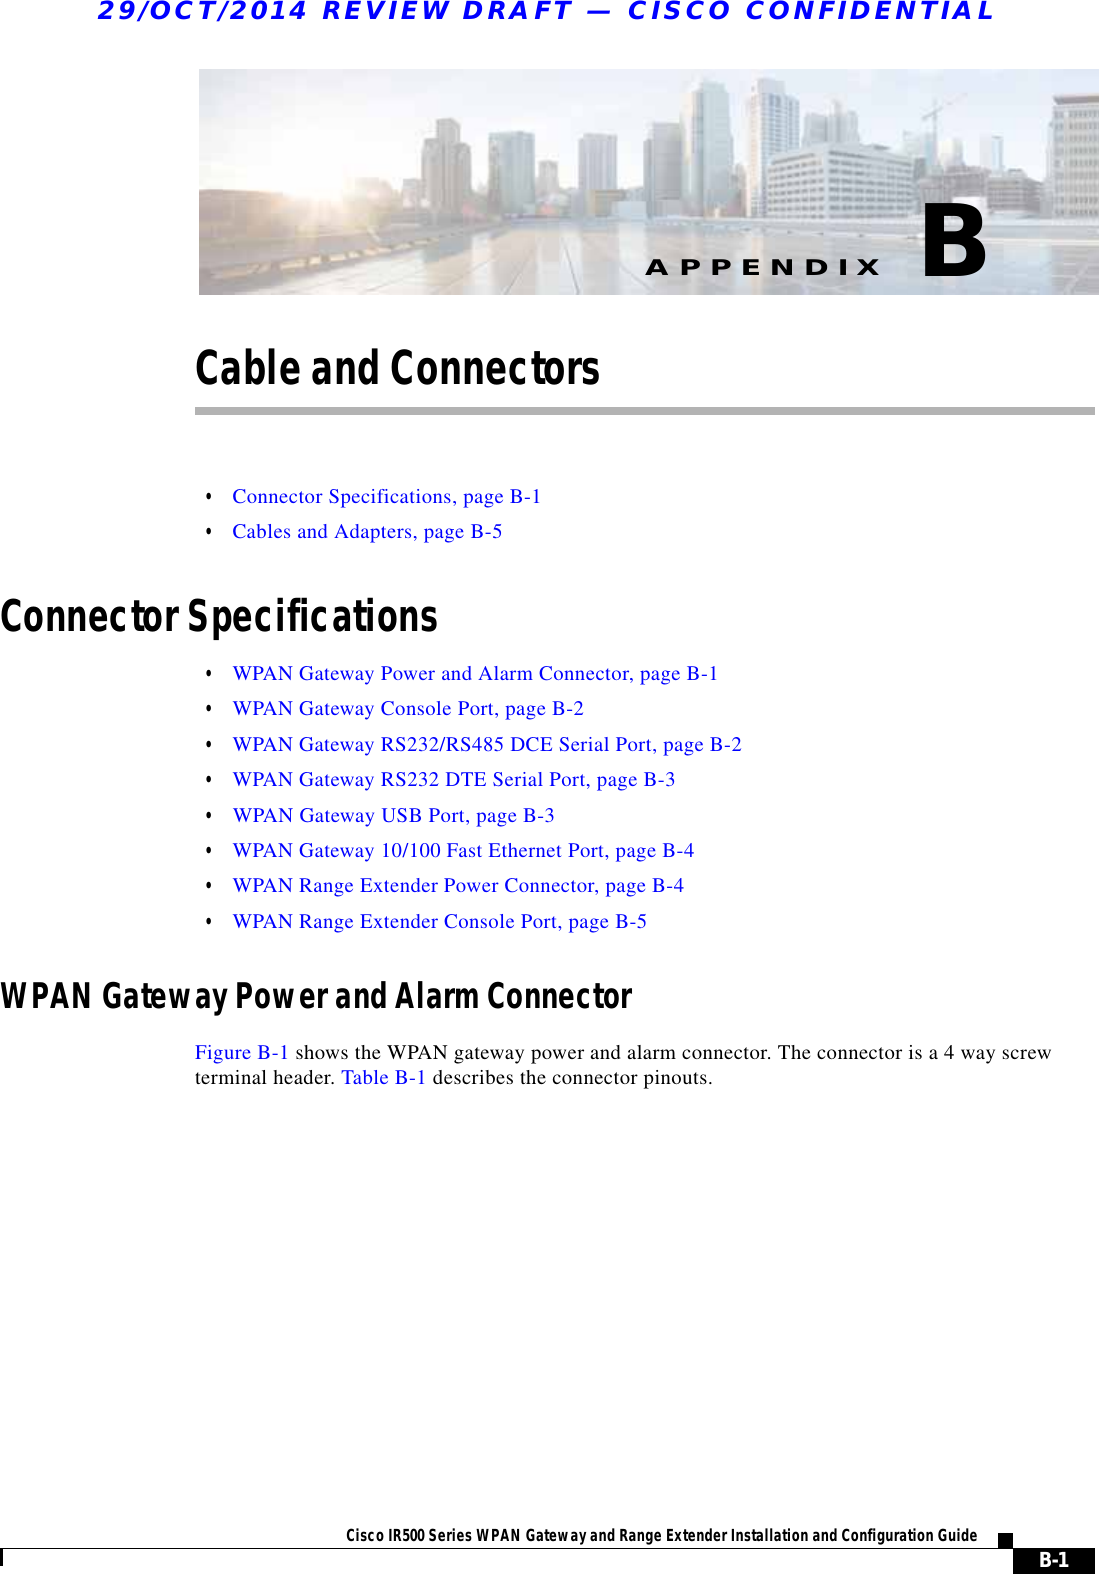 B-1Cisco IR500 Series WPAN Gateway and Range Extender Installation and Configuration Guide APPENDIX29/OCT/2014 REVIEW DRAFT — CISCO CONFIDENTIALBCable and Connectors  • Connector Specifications, page B-1  • Cables and Adapters, page B-5Connector Specifications  • WPAN Gateway Power and Alarm Connector, page B-1  • WPAN Gateway Console Port, page B-2  • WPAN Gateway RS232/RS485 DCE Serial Port, page B-2  • WPAN Gateway RS232 DTE Serial Port, page B-3  • WPAN Gateway USB Port, page B-3  • WPAN Gateway 10/100 Fast Ethernet Port, page B-4  • WPAN Range Extender Power Connector, page B-4  • WPAN Range Extender Console Port, page B-5WPAN Gateway Power and Alarm ConnectorFigure B-1 shows the WPAN gateway power and alarm connector. The connector is a 4 way screw terminal header. Table B-1 describes the connector pinouts.